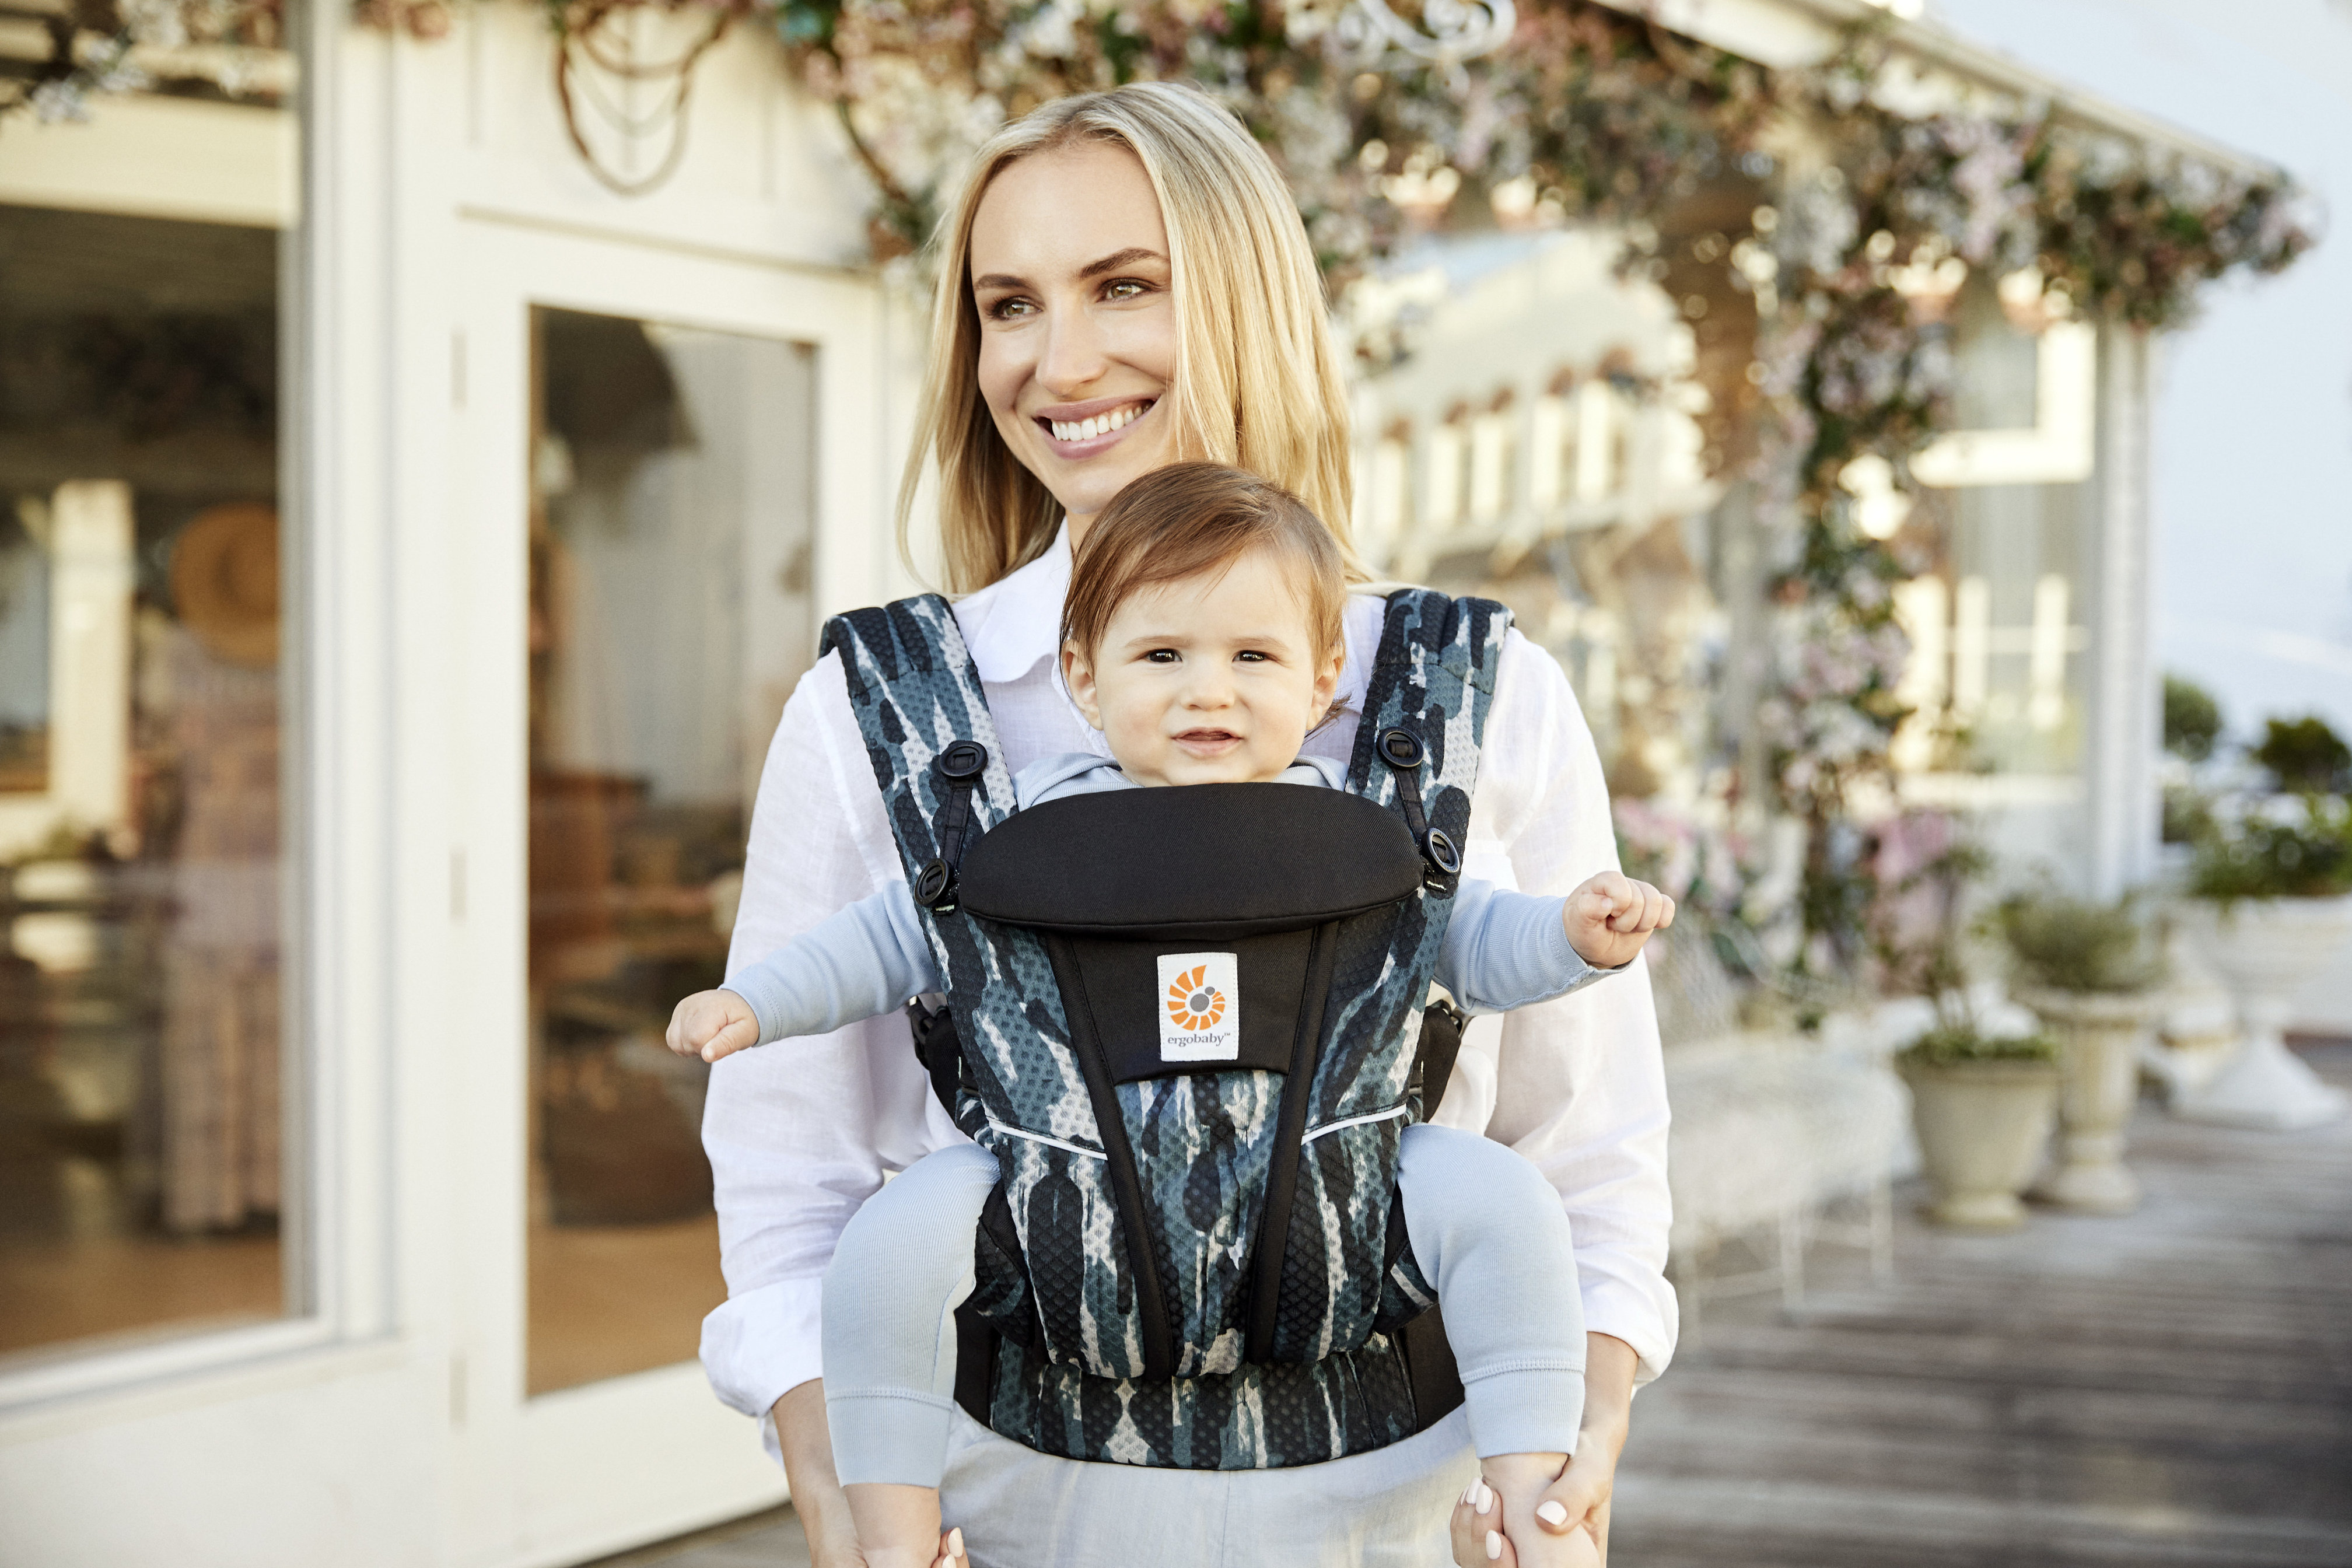  L go Homme nib Lee z paint black baby sling newborn baby L go baby Ergobaby omni breeze... string pouch attaching free shipping 